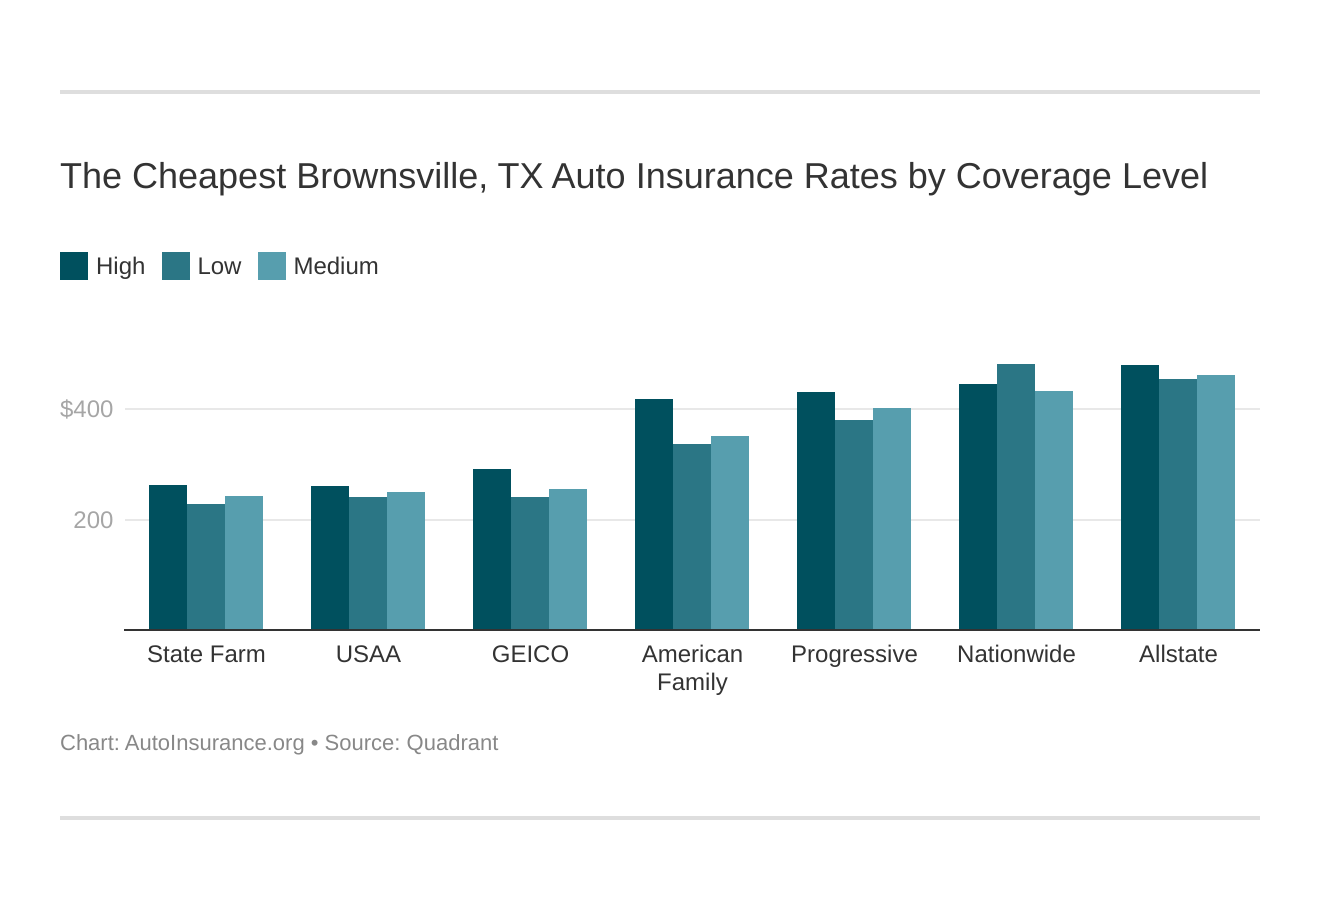 The Cheapest Brownsville, TX Auto Insurance Rates by Coverage Level